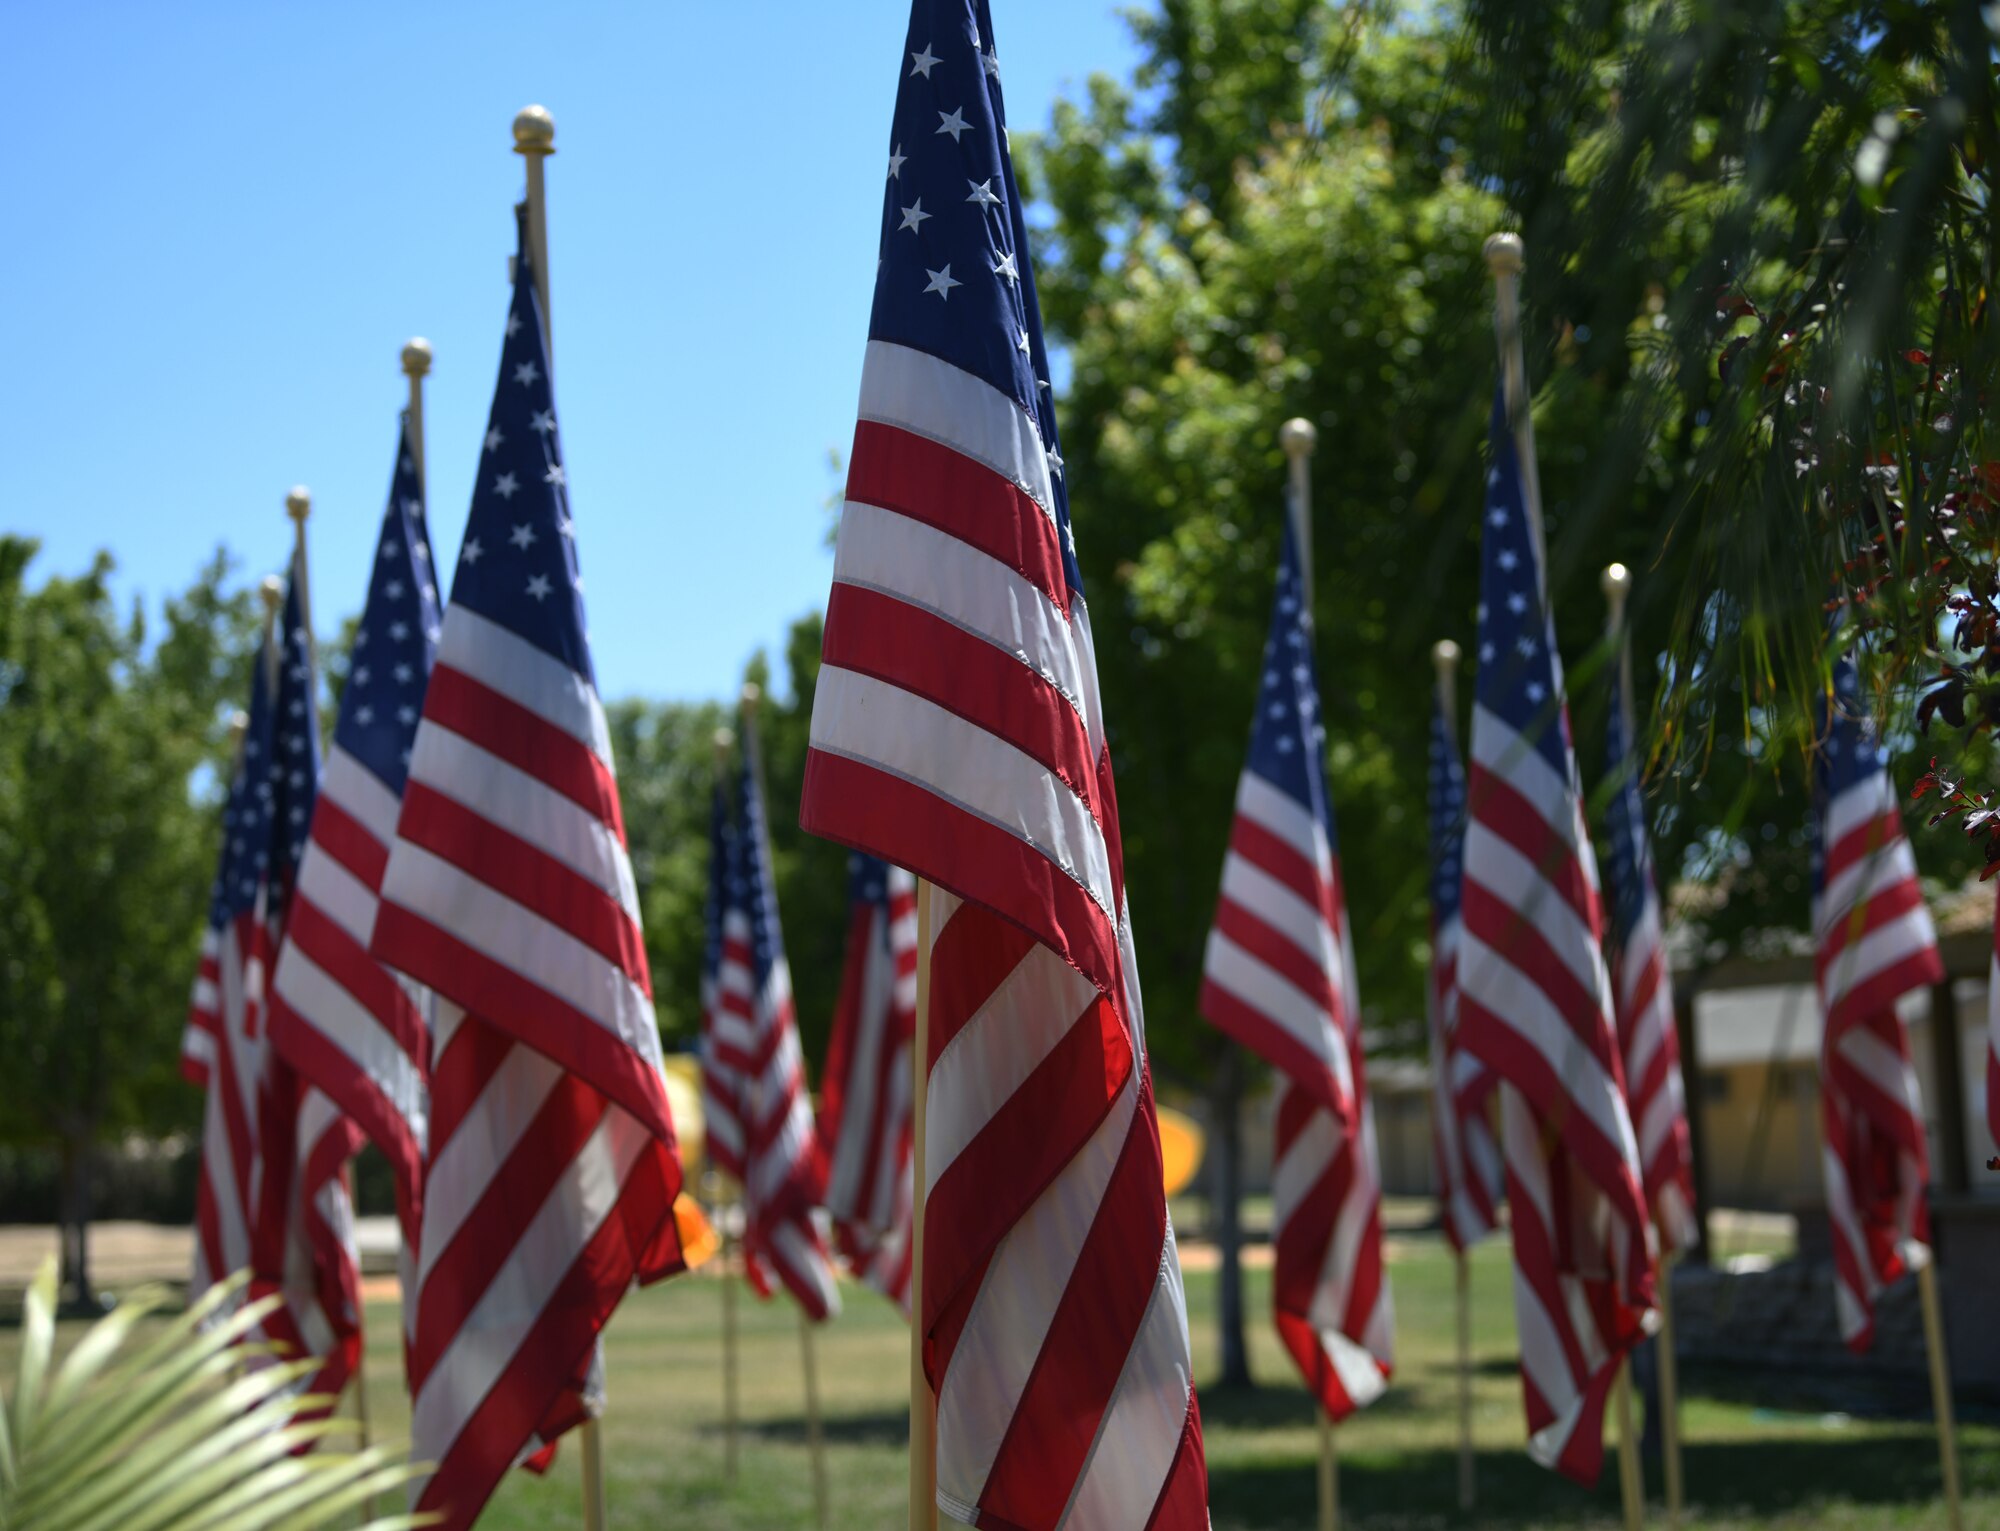 Happy Memorial Day! Today, we honor and remember those who sacrificed their lives keeping our nation safe.